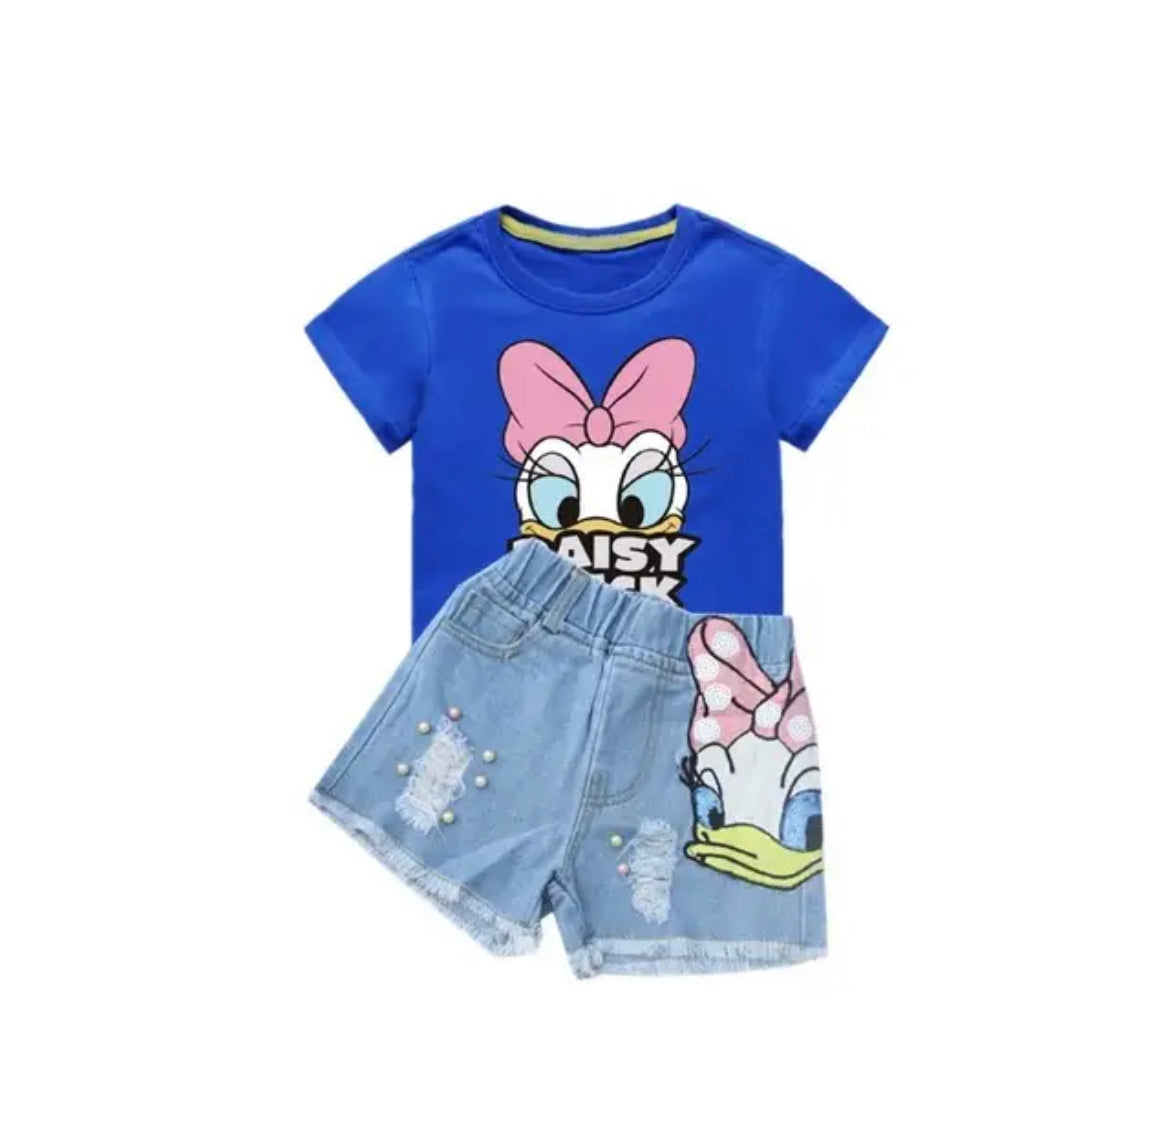 Daisy Duck Toddler Girl Outfit